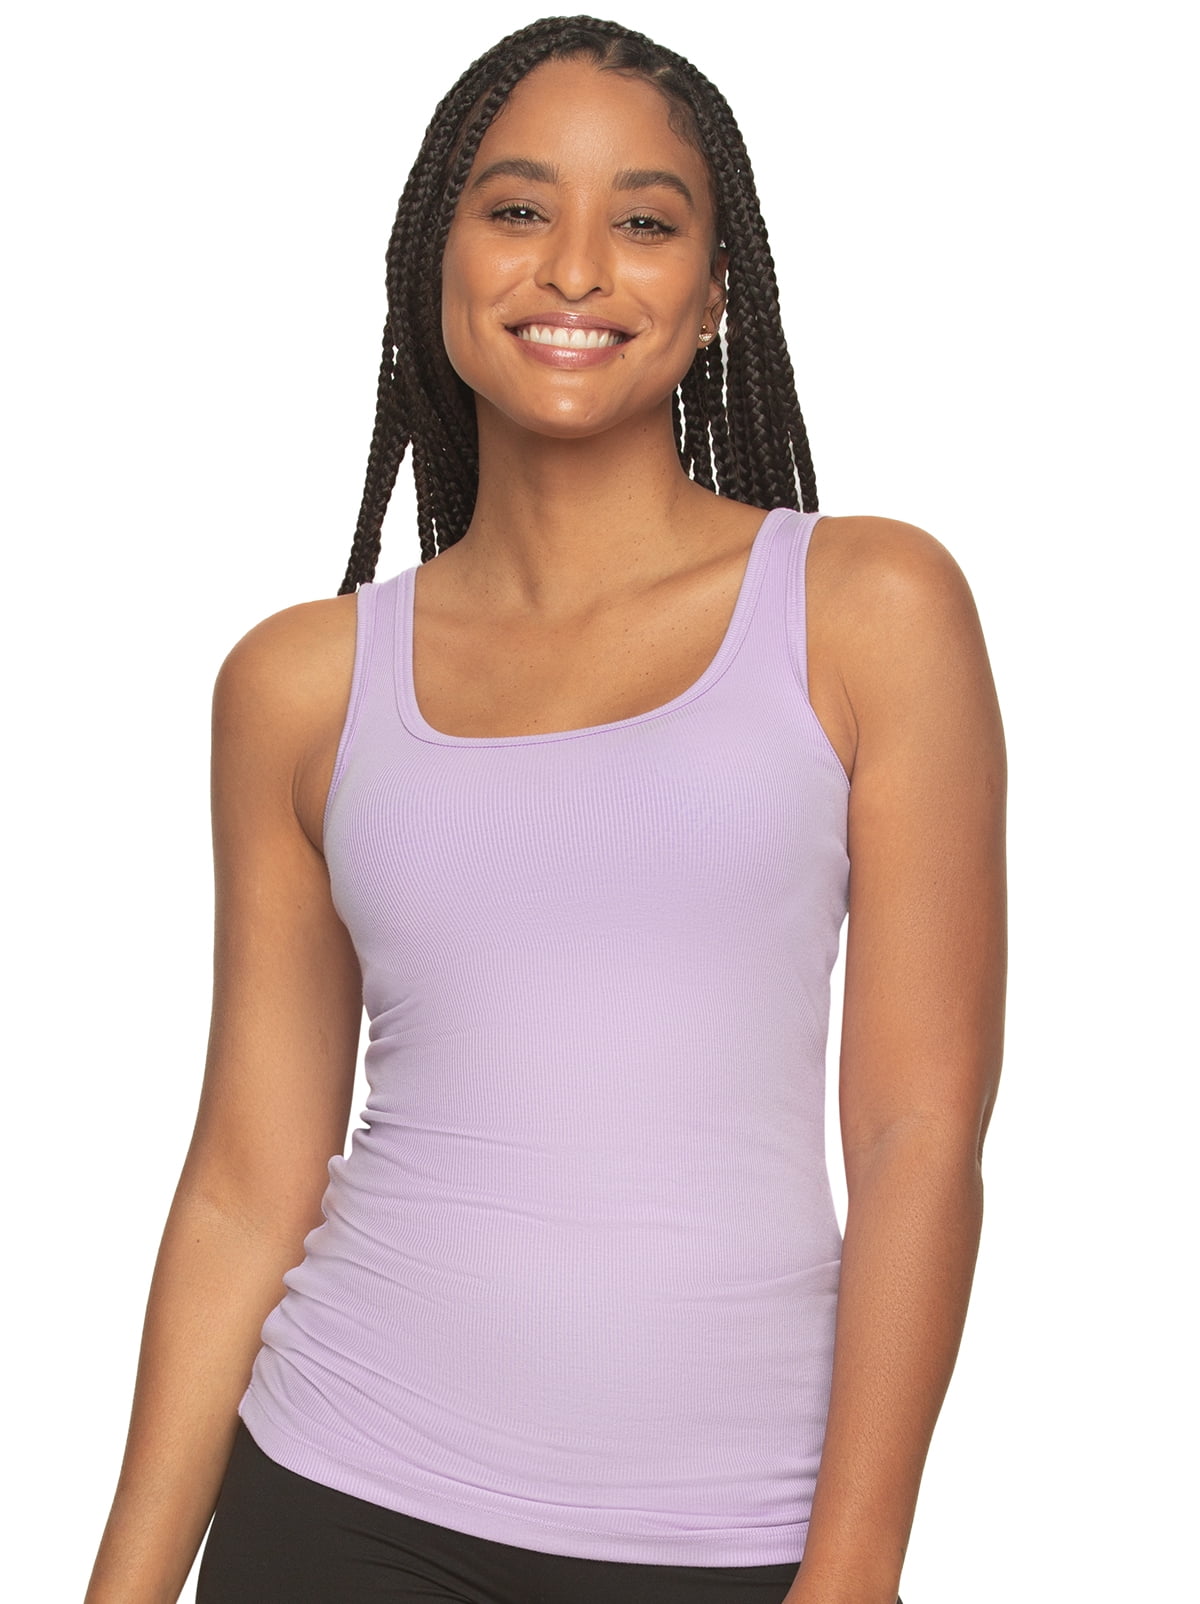 Felina Cotton Ribbed Tank Top - Class Tank Top for Women, Workout Tank Top  For Women (Color Options Available) (Purple Rose, Small)